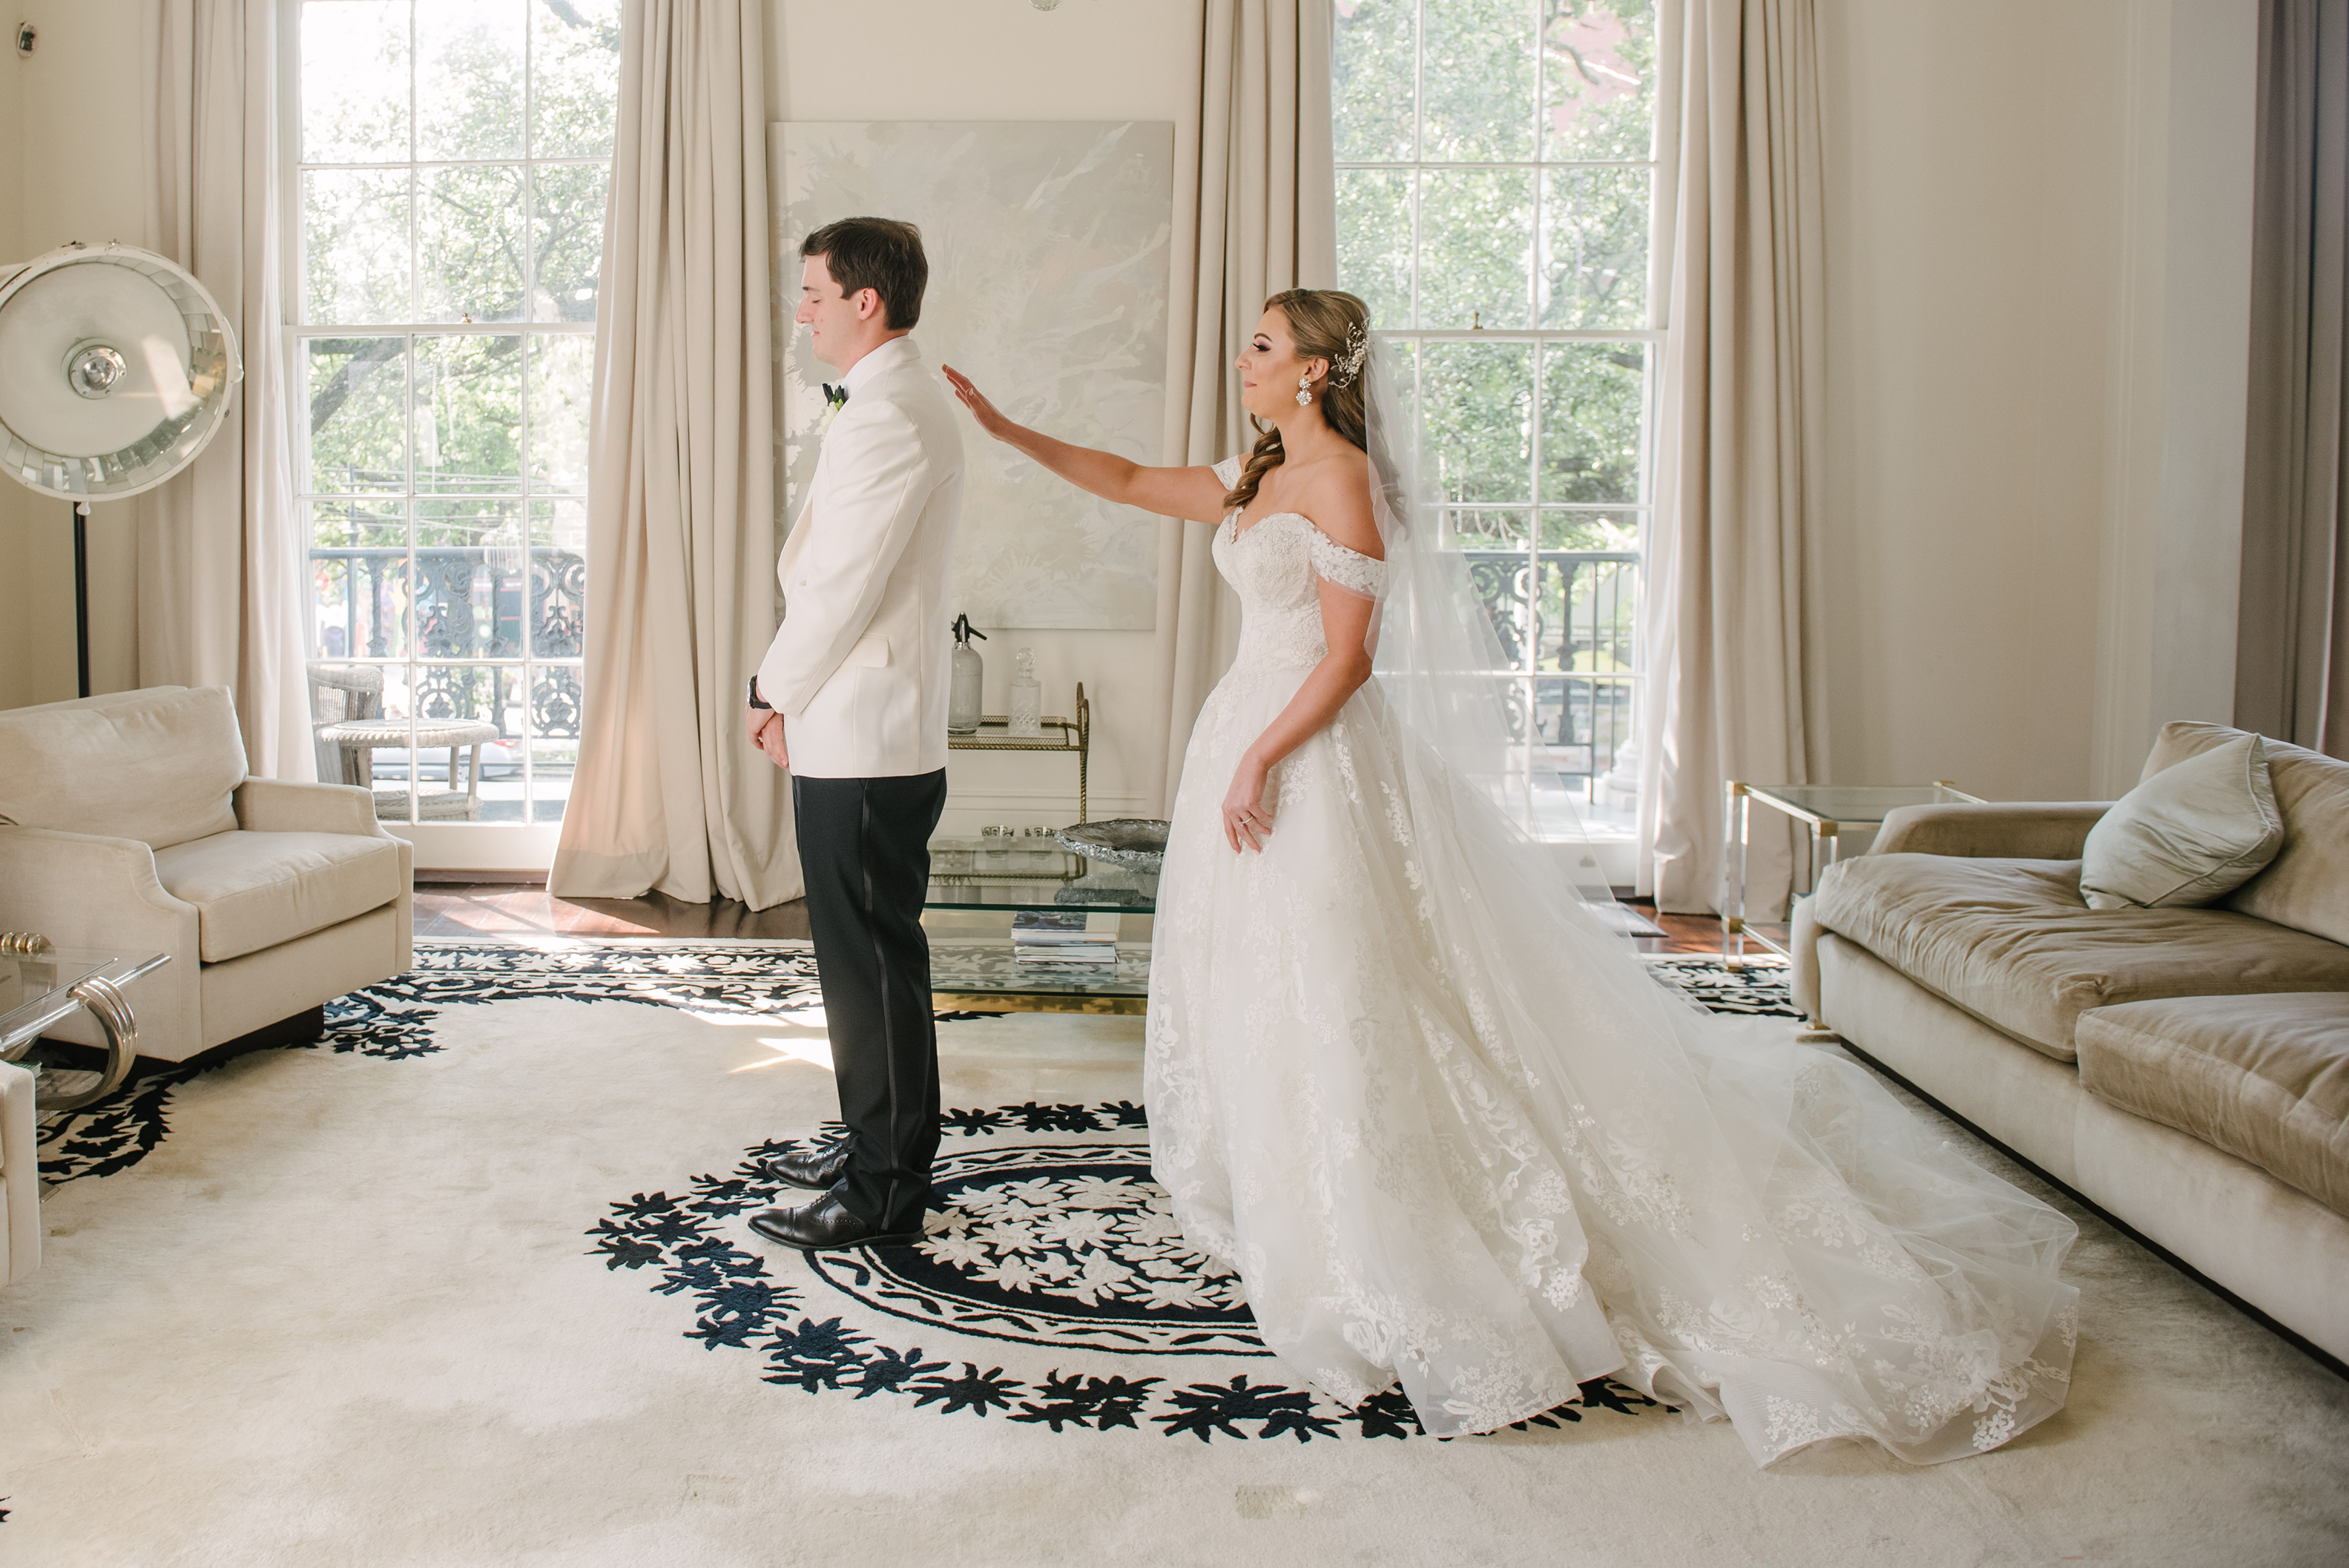 Wedding “first look” at Jon Vaccari House in New Orleans.